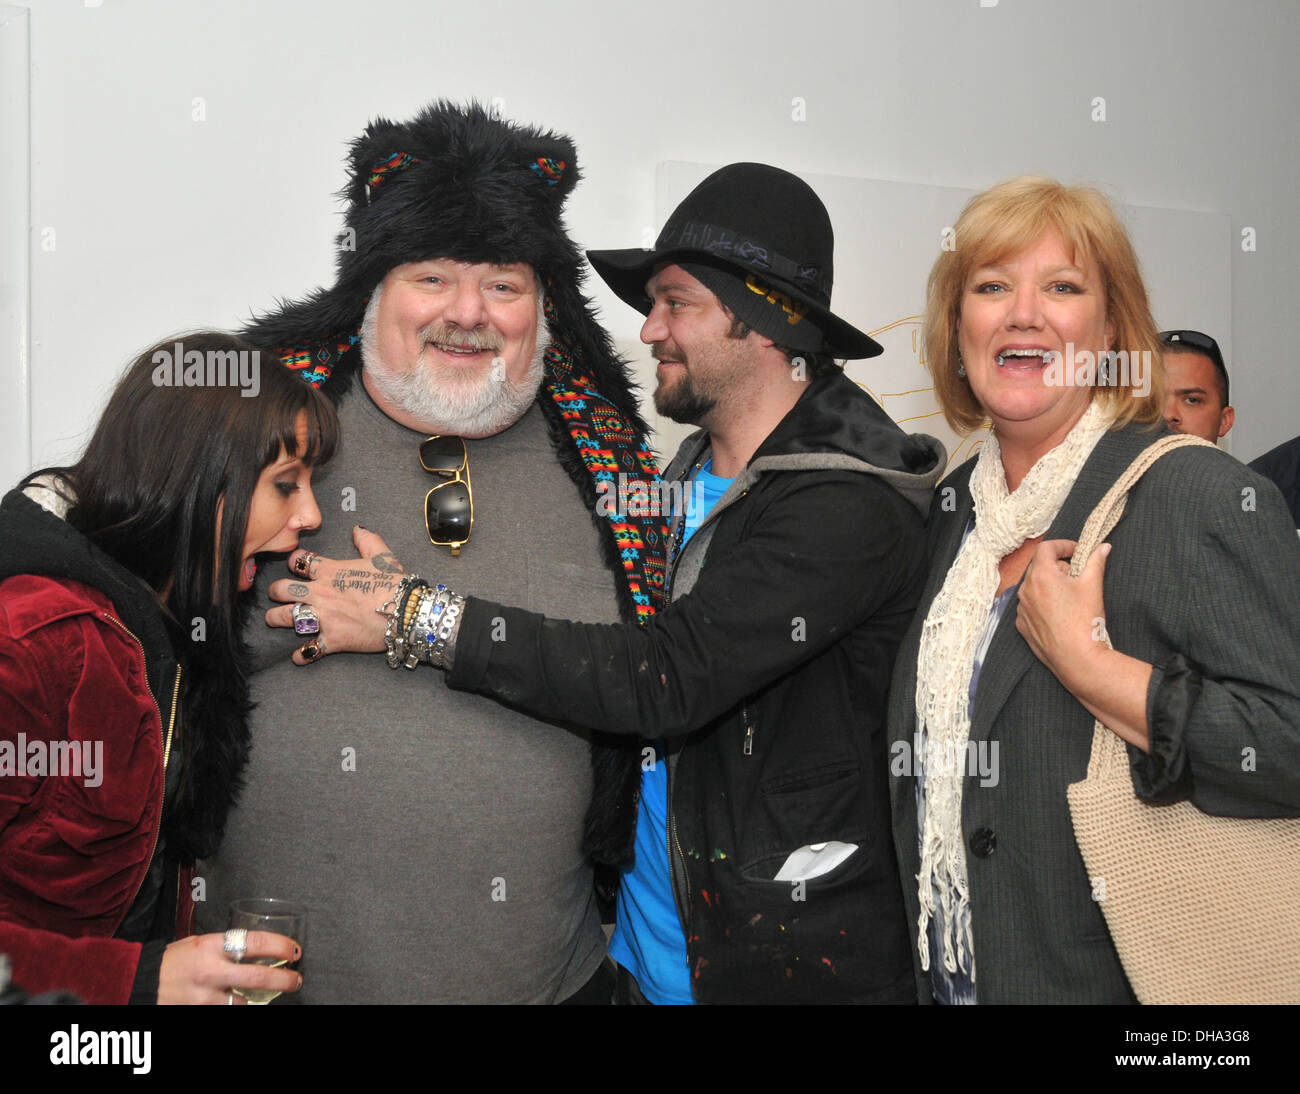 Nikki B Phil Margera Bam Margera and April Margera Bam Margera & Friends art exhibition opening at James Oliver Gallery Stock Photo